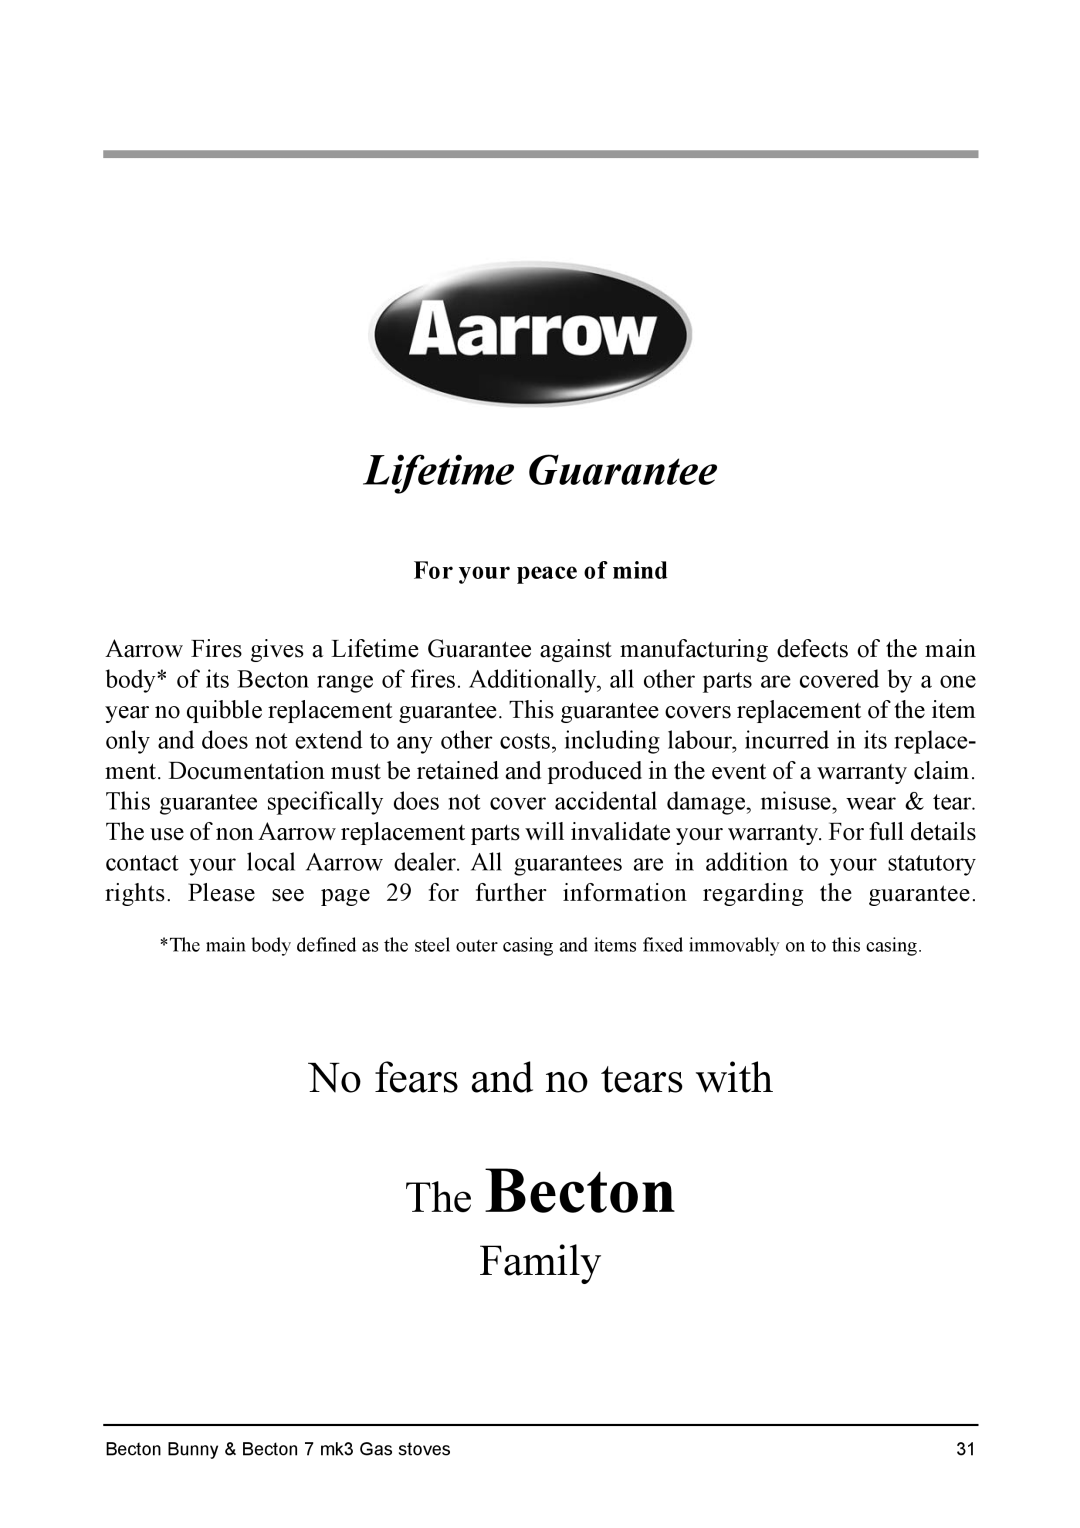 Aarrow Fires Becton 7 mk3 Lifetime Guarantee, No fears and no tears with, Family, The Becton, For your peace of mind 